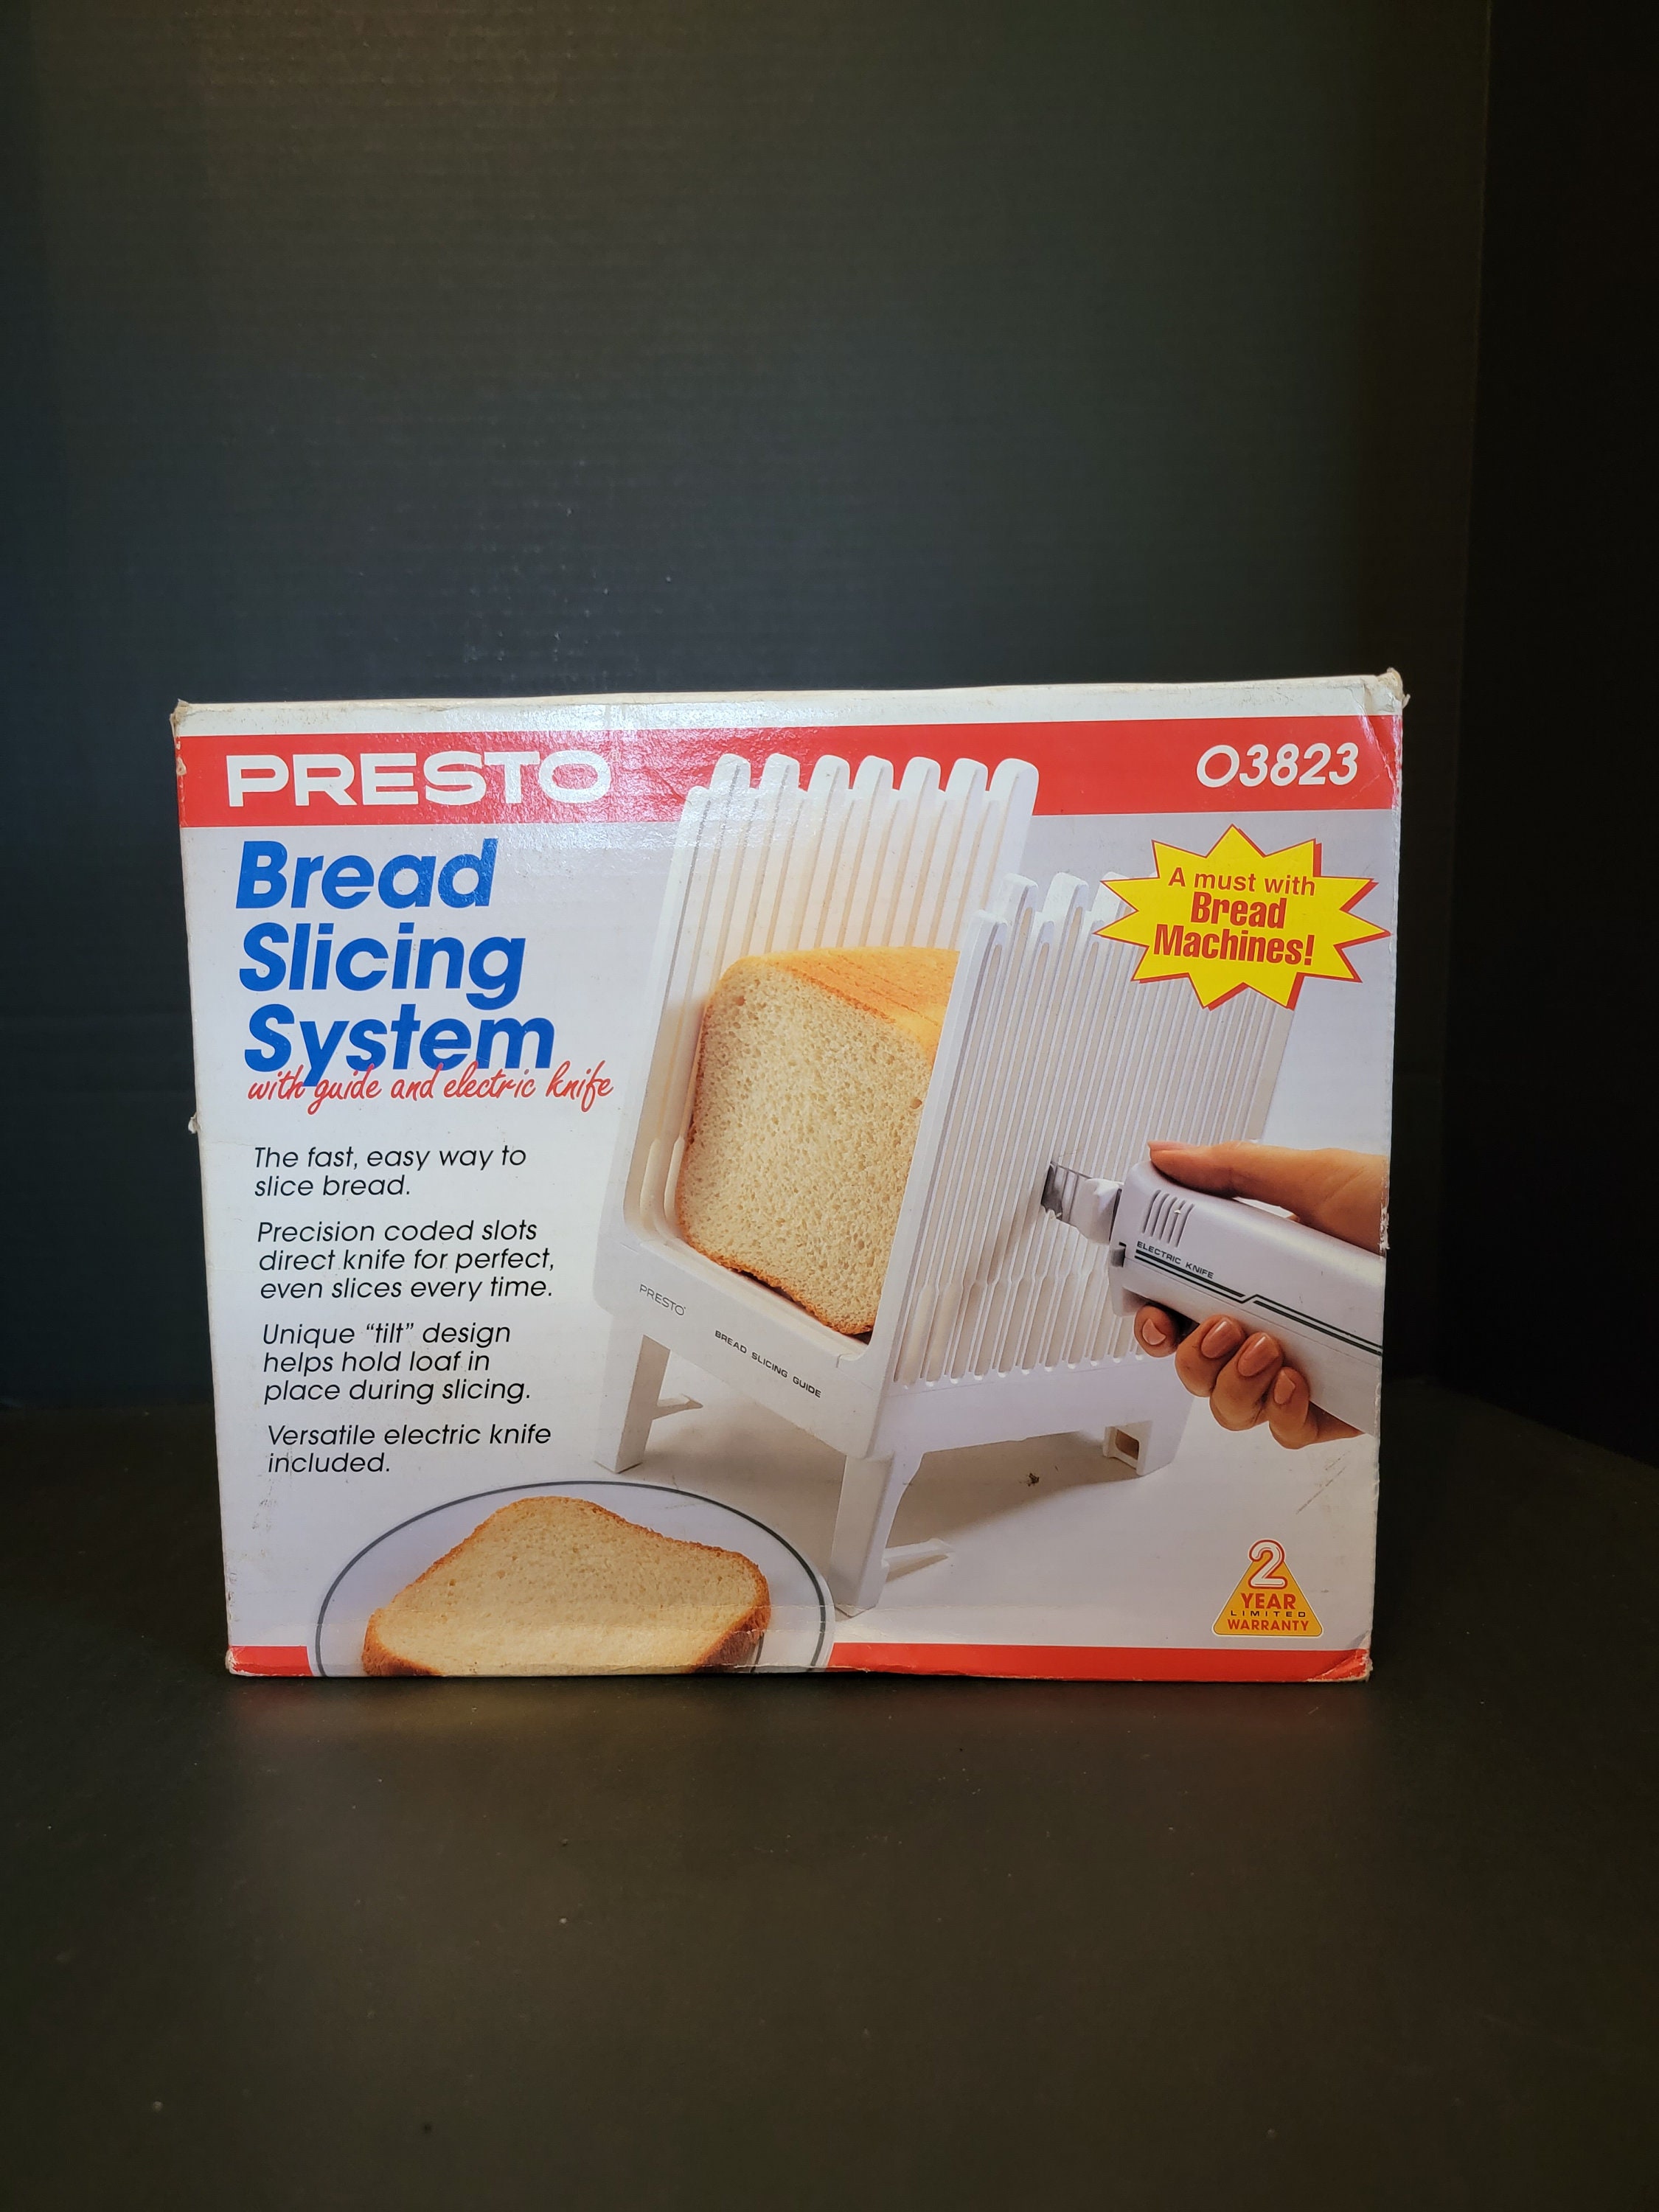 Bread Slicer Cutting Guide with Knife Bamboo Bread Cutter for